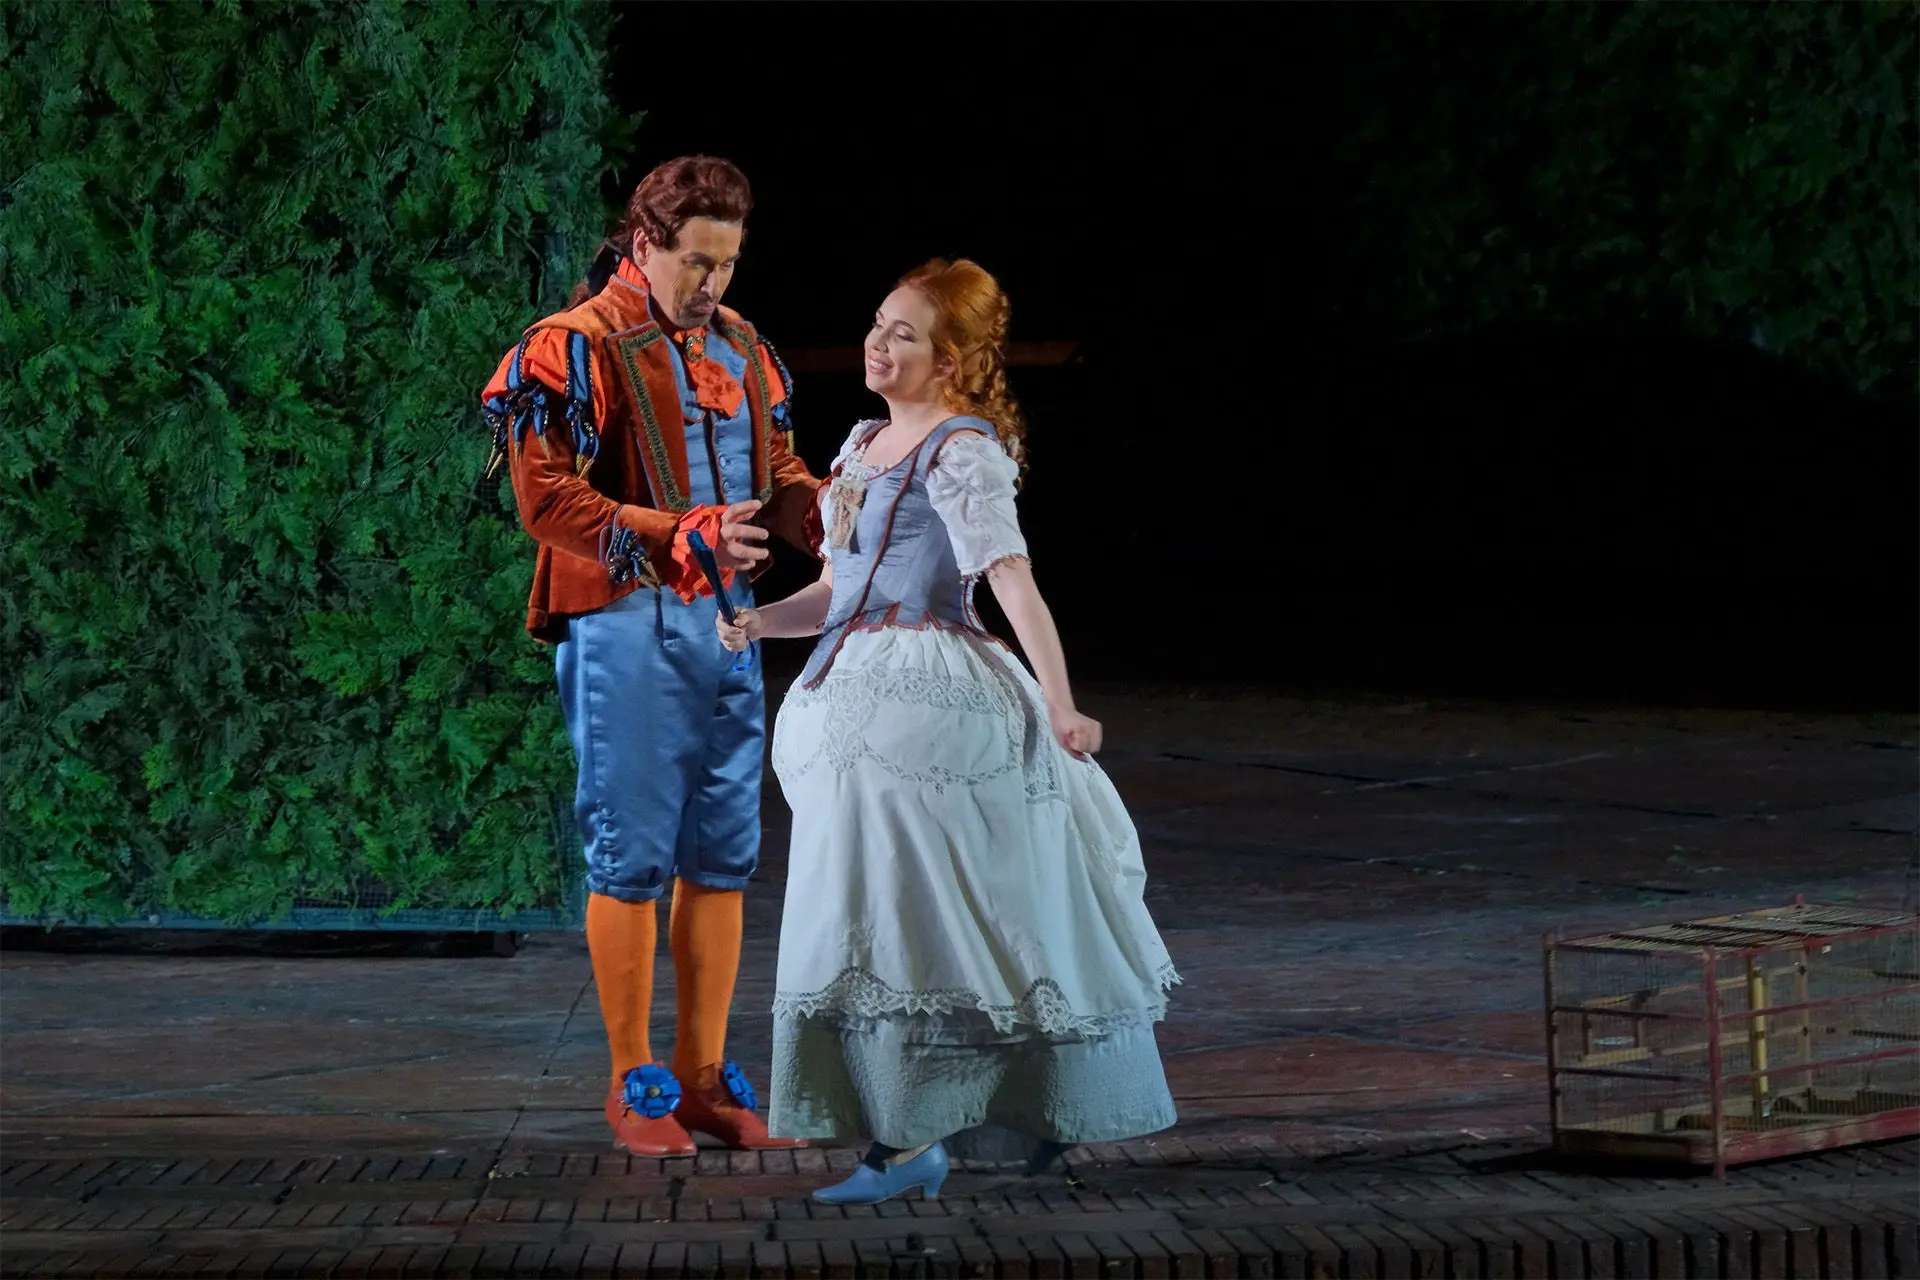 Figaro and Rosina are standing next to each other at center stage in front of the labyrinth. Figaro is wearing a bright blue satin suit consisting of a buttoned waistcoat and knee length breeches with orange stockings below them. Over the waistcoat he is wearing an orange velvet jacket that is open in the front. The jacket is shorter and straight in the front and longer and pleated in the back. The shoulders are padded and accented with blue and orange inserts, while the wrists and collar have bright orange ruffles. On his feet he is wearing squarish shoes with a low heel and a large blue flower at the neck of the foot. He is wearing a chestnut colored wig with the hair pulled back and tied in a tail with a ribbon. Rosina is wearing a gown made of light cotton with a wide skirt that falls to her ankles. The top consists of reinforced bodice that is a darker shade of sky blue with red trim. The sleeves are short and light blue. The skirt is light blue, wide and layered. The top layer is accented with lace. On her feet she is wearing squarish shoes with a low heel. Her is a light chestnut brown color, almost orange. It is pulled back on the nape of her neck and falls down to her shoulders. She is holding a blue hand fan that is closed. 